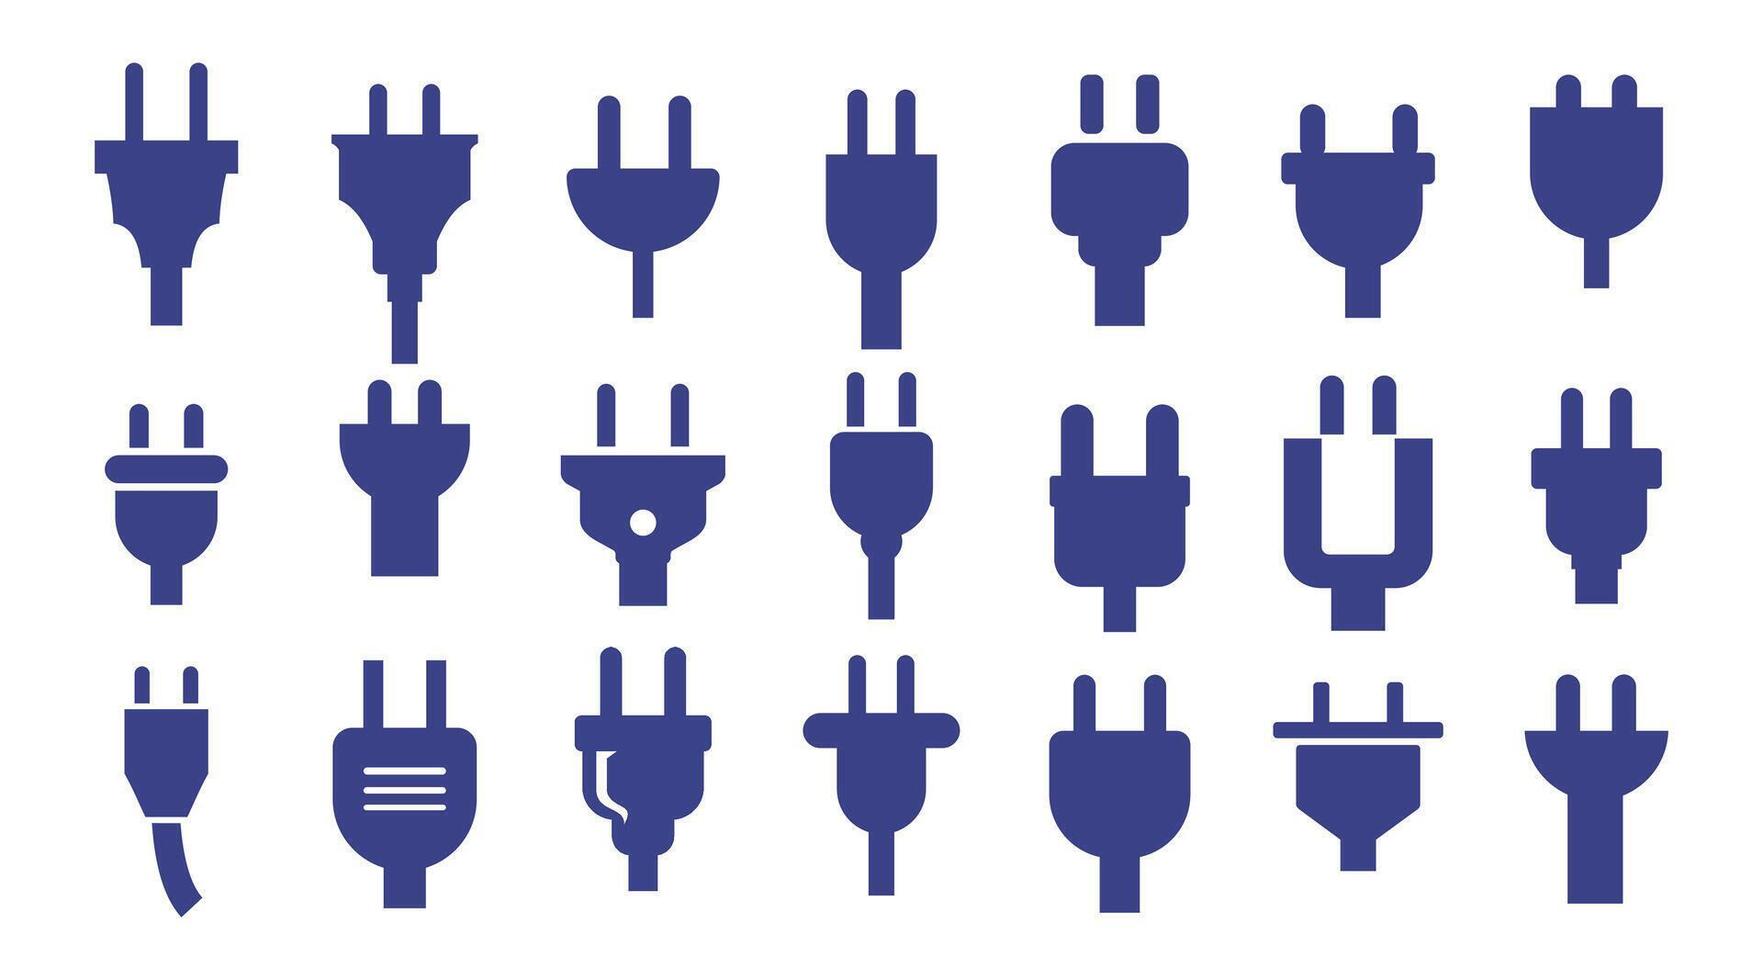 Electric plugs icon symbol set collection vector